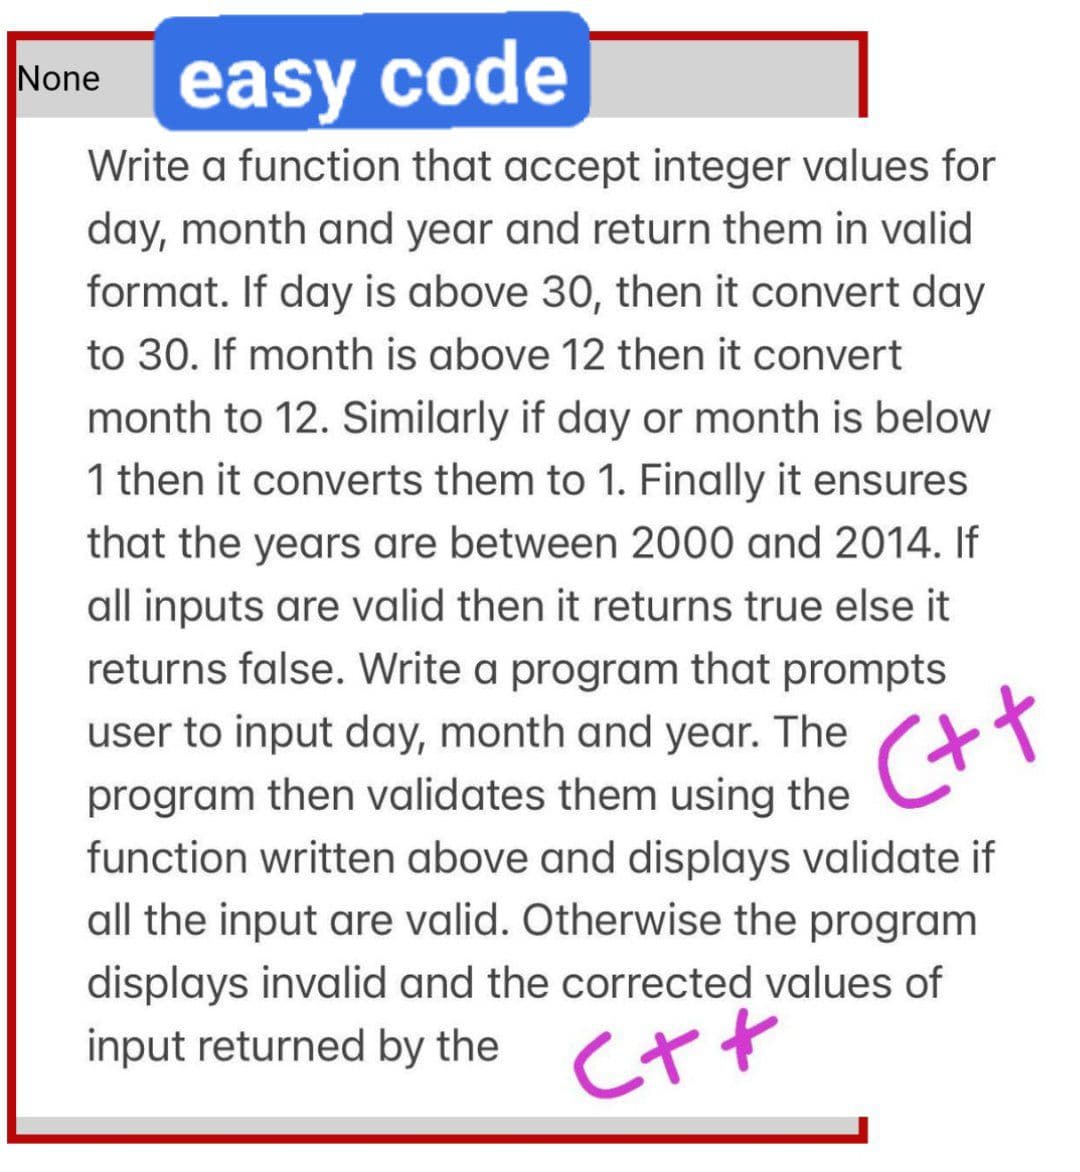 None
easy code
Write a function that accept integer values for
day, month and year and return them in valid
format. If day is above 30, then it convert day
to 30. If month is above 12 then it convert
month to 12. Similarly if day or month is below
1 then it converts them to 1. Finally it ensures
that the years are between 2000 and 2014. If
all inputs are valid then it returns true else it
returns false. Write a program that prompts
user to input day, month and year. The
program then validates them using the
function written above and displays validate if
all the input are valid. Otherwise the program
displays invalid and the corrected values
input returned by the
